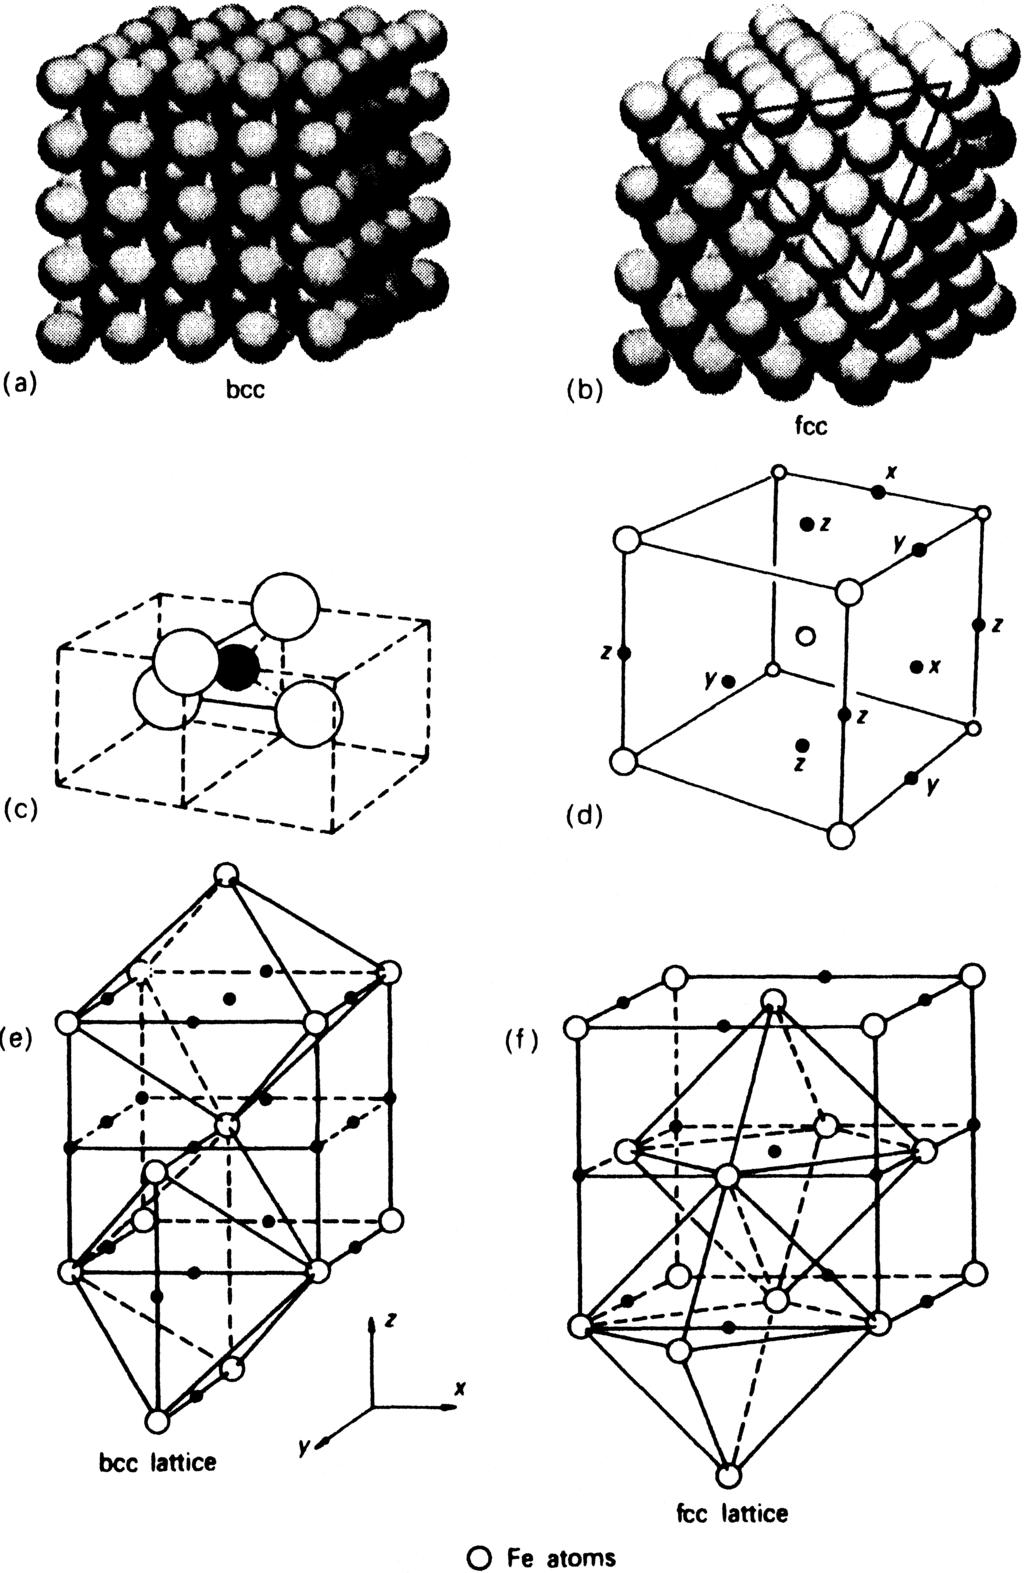 Ch01-H8084.tex 5/5/2006 12: 15 Page 6 6 CHAPTER 1 IRON AND ITS INTERSTITIAL SOLID SOLUTIONS Fig. 1.4 (a) bcc structure, (b) fcc structure (Moffat, Pearsall and Wulff,The Structure and Properties of Materials: Vol.